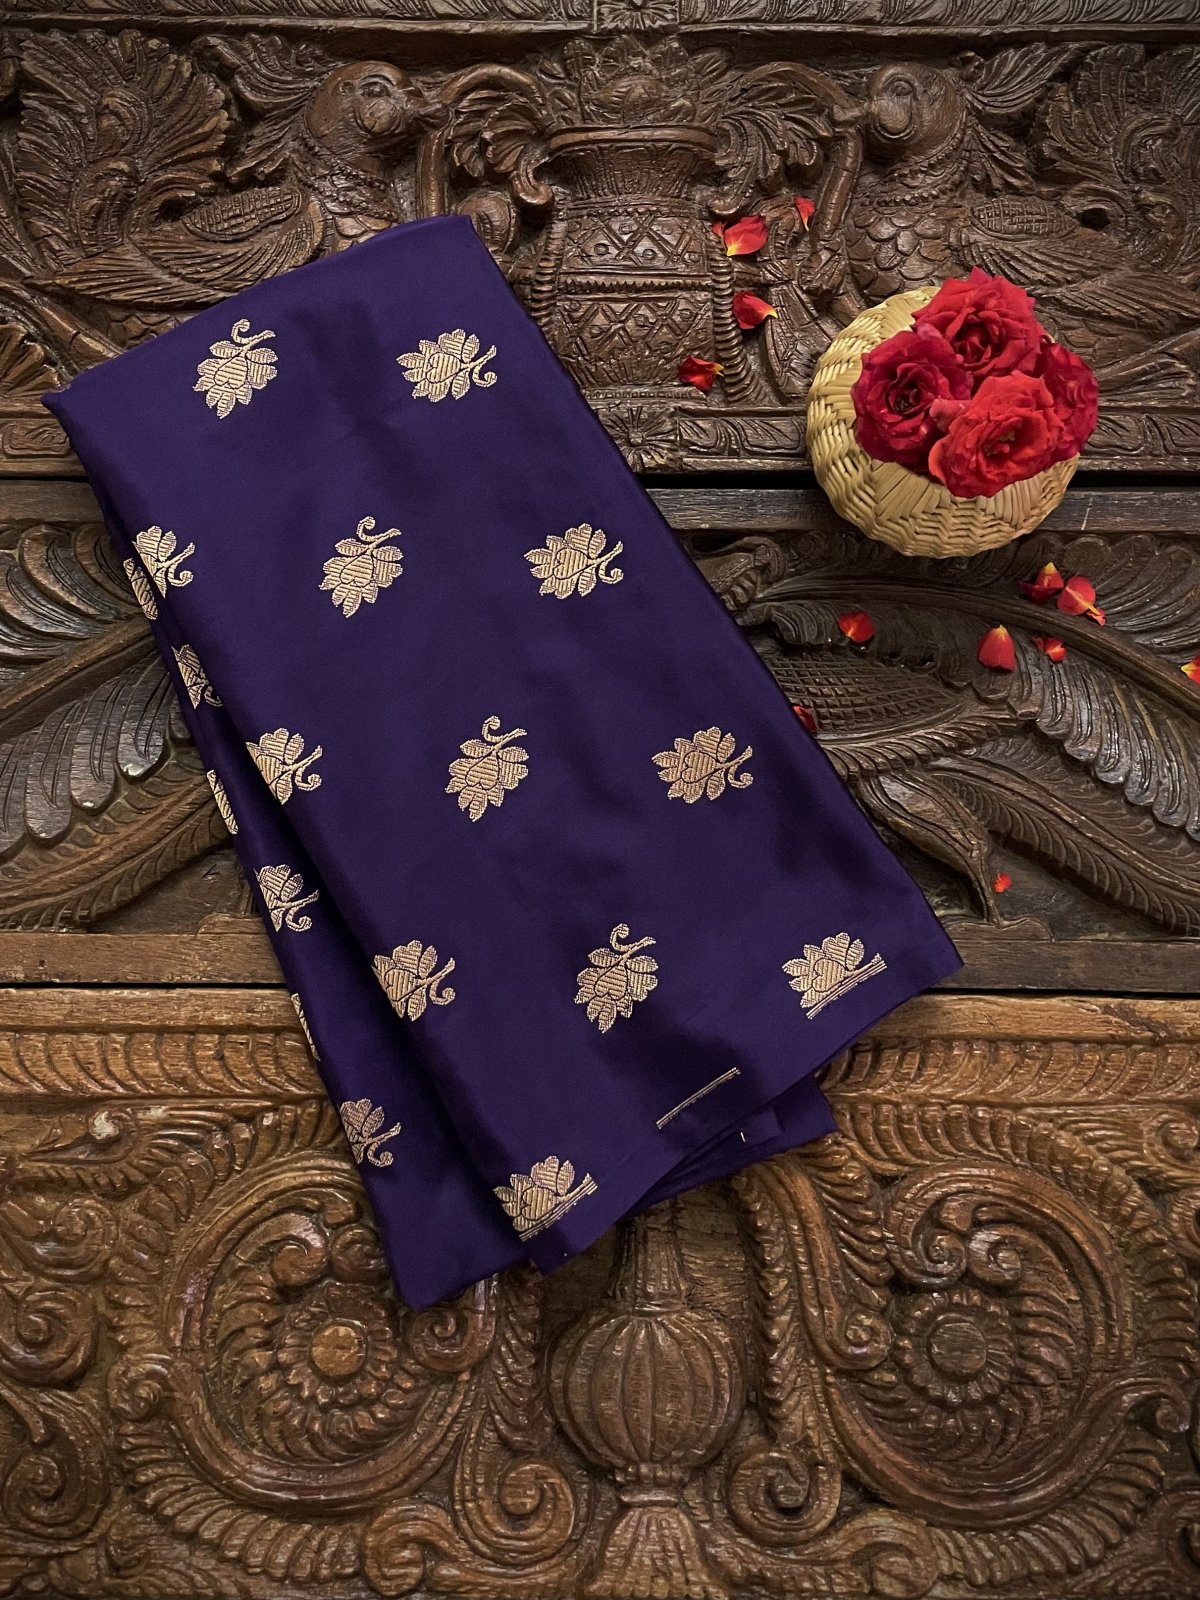 Violet Banaras Silk Blouse With Floral Butties